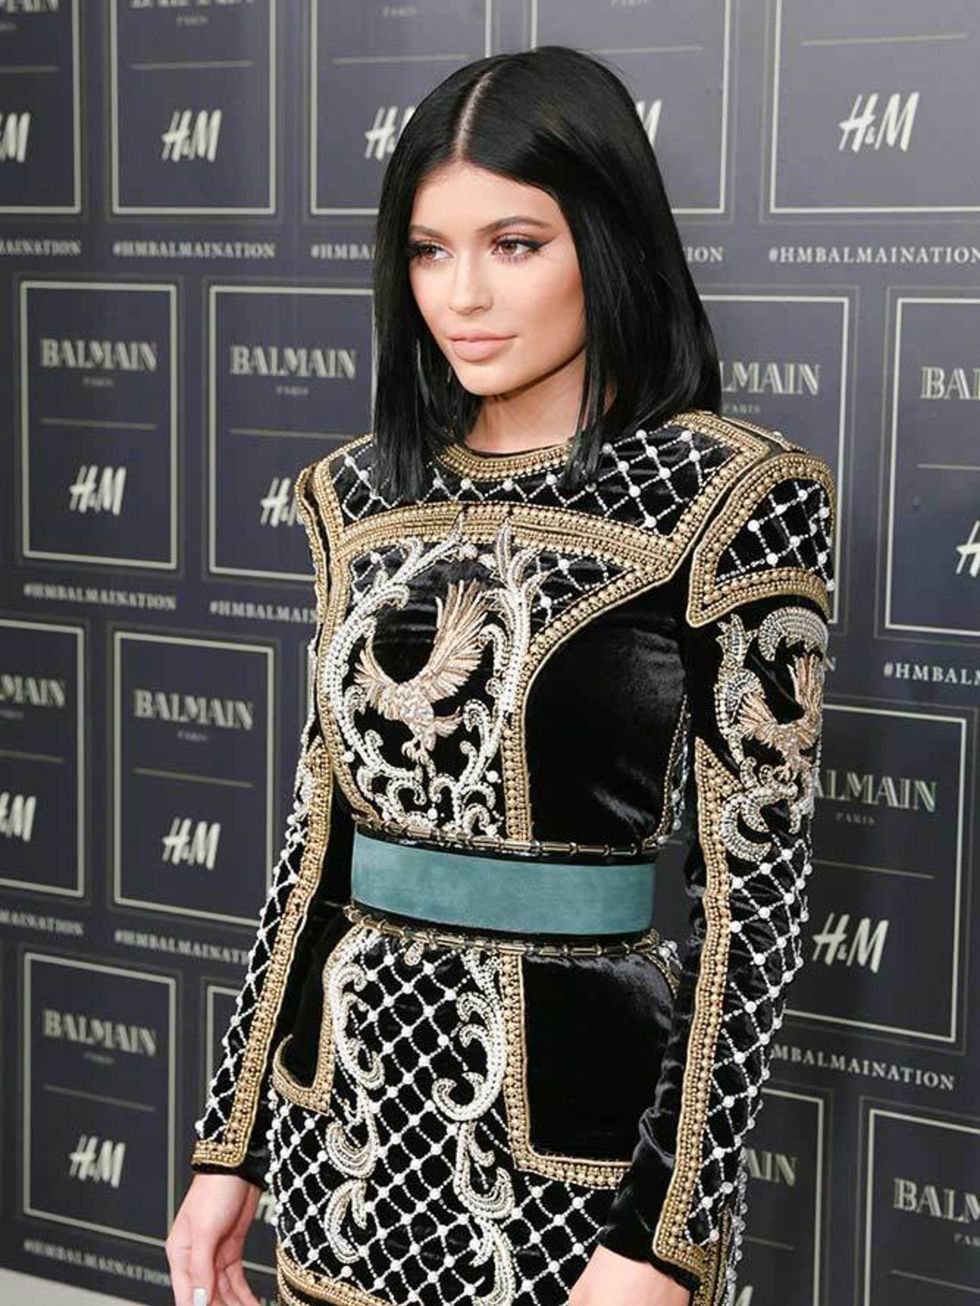 Kylie jenner attends the H&M x Balmain show in New york, October 2015.